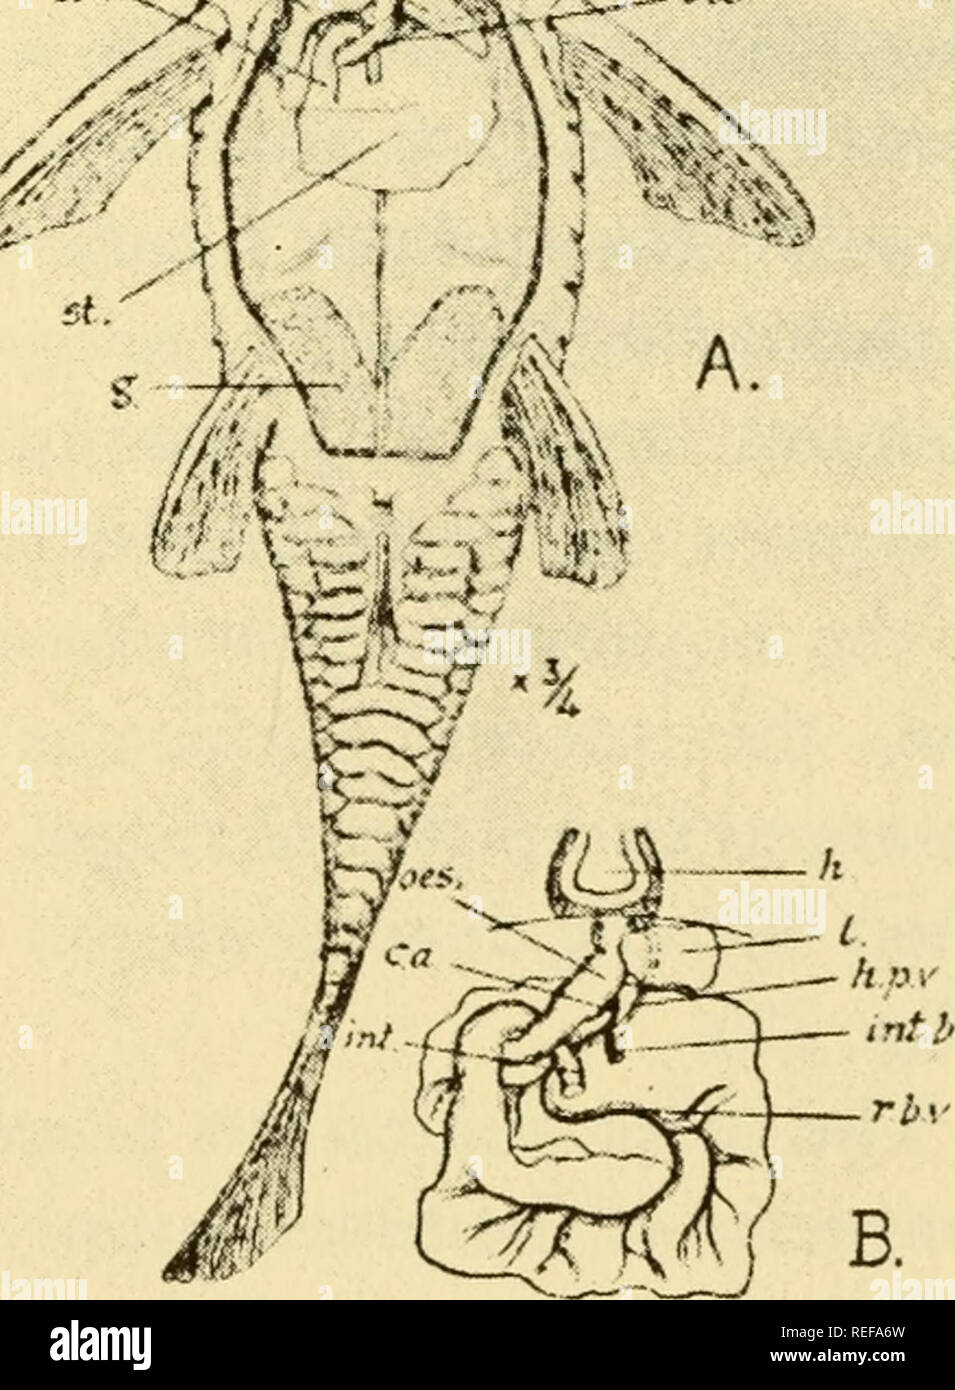 . The comparative physiology of respiratory mechanisms. Respiration. Fig. 25 Fig. 26 Fig. 25. Fourth branchial arch in Clarias melanoderma with respiratory &quot;tree.&quot; (Bohme.) Fig. 26. Respiratory tree slightly enlarged (Diameter about 2 cm'in fish of 50 cm). (Bohme.) frogs (Das, 1928). In Plecostomus and Ancistrus (tropical Siluroida) the stomach (Fig. 27) is a respiratory organ into which air is swallowed and again regurgitated (Carter and Beadle, 1930; Carter, 1935). which Cobitis (Misgurnus) is the best known example, more distal parts of the in- testine are respiratory, and the air Stock Photo